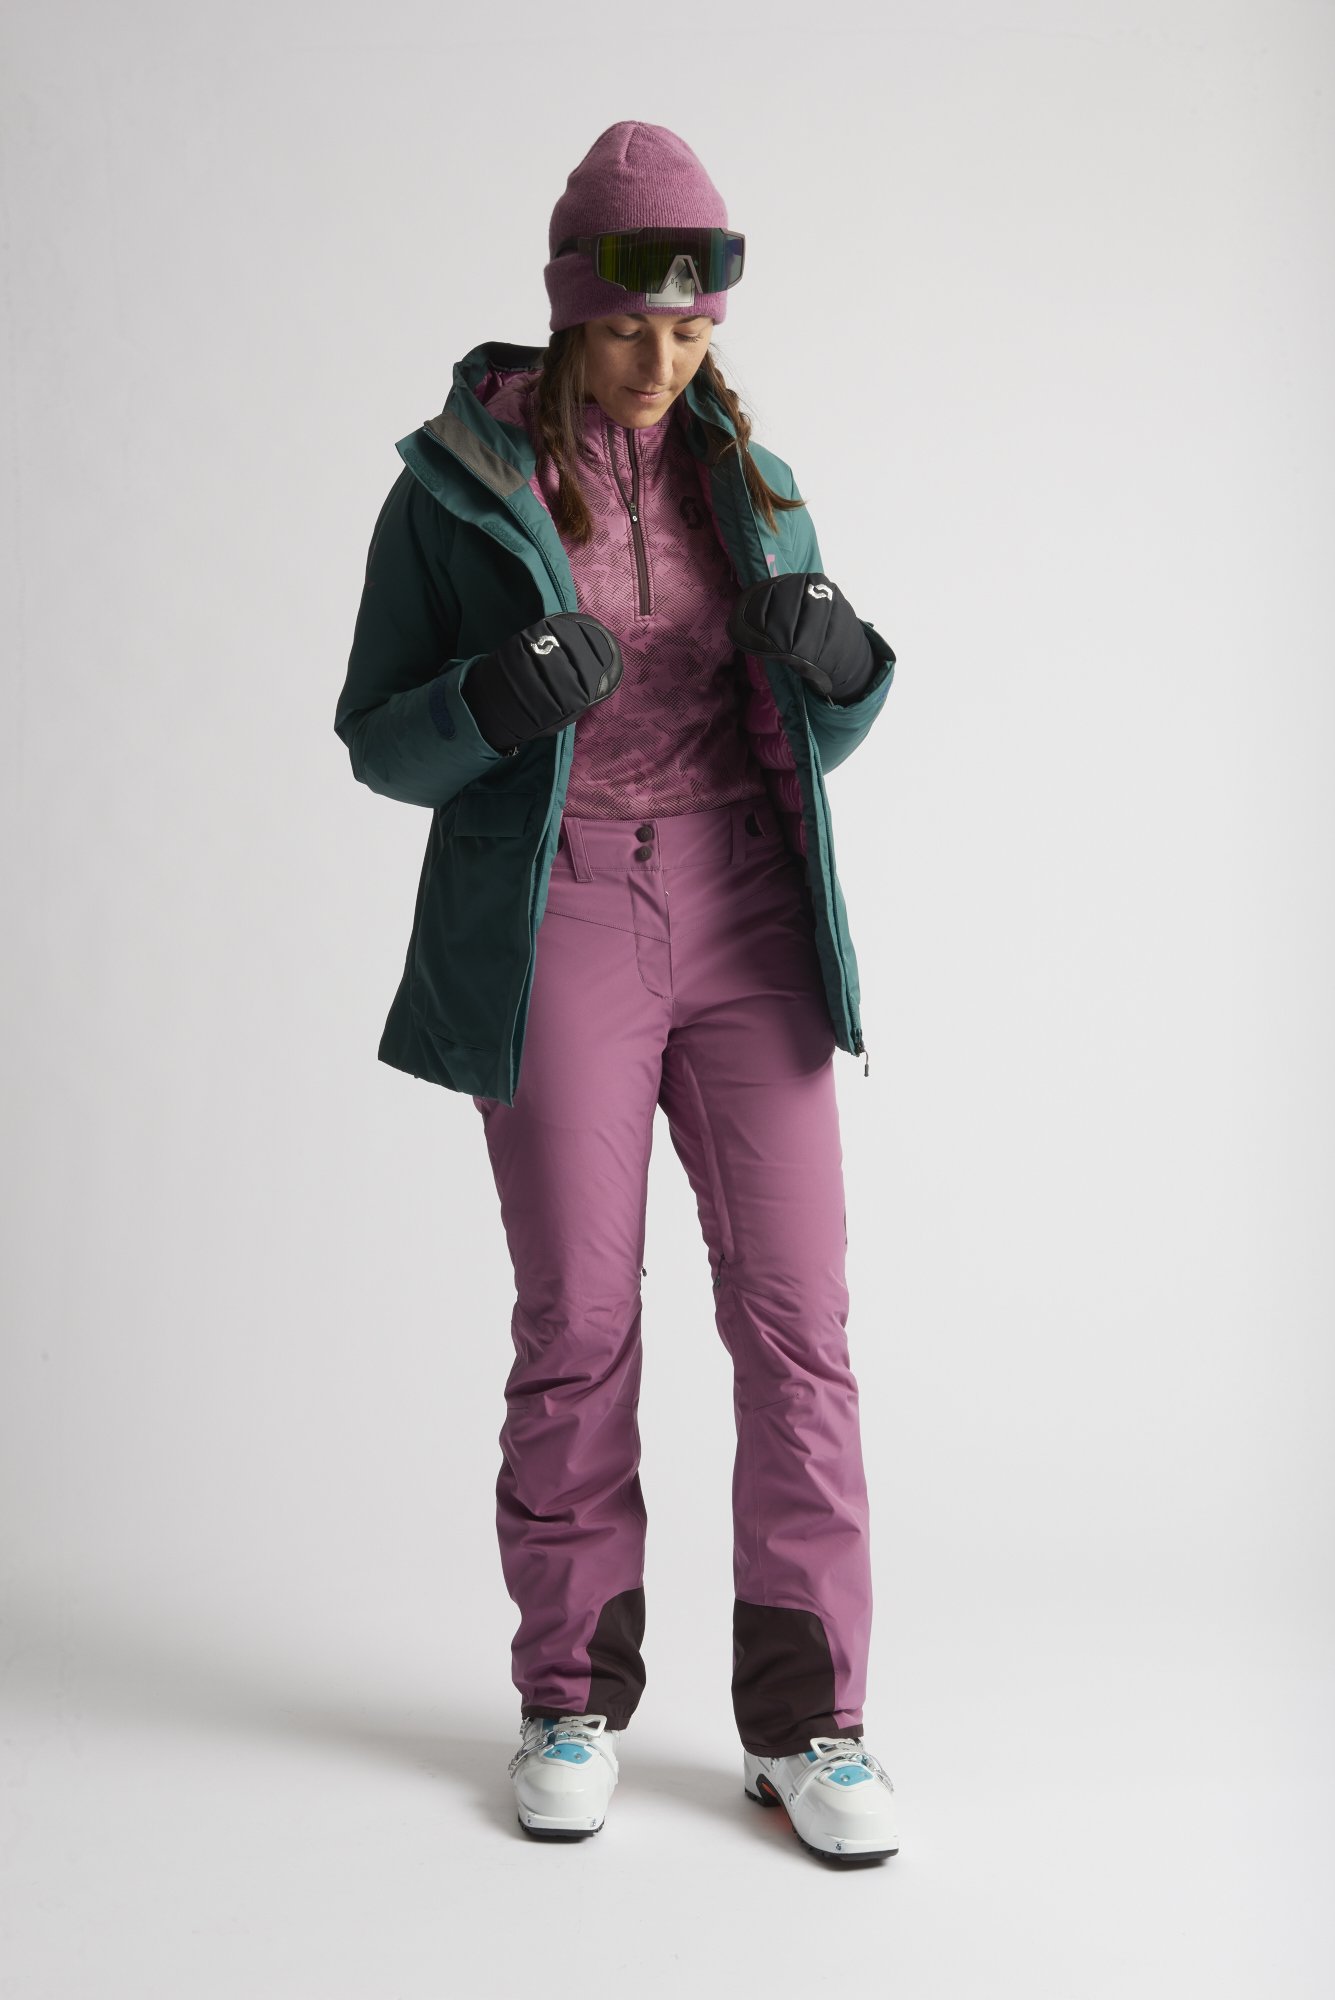 Tech ski outfit for women